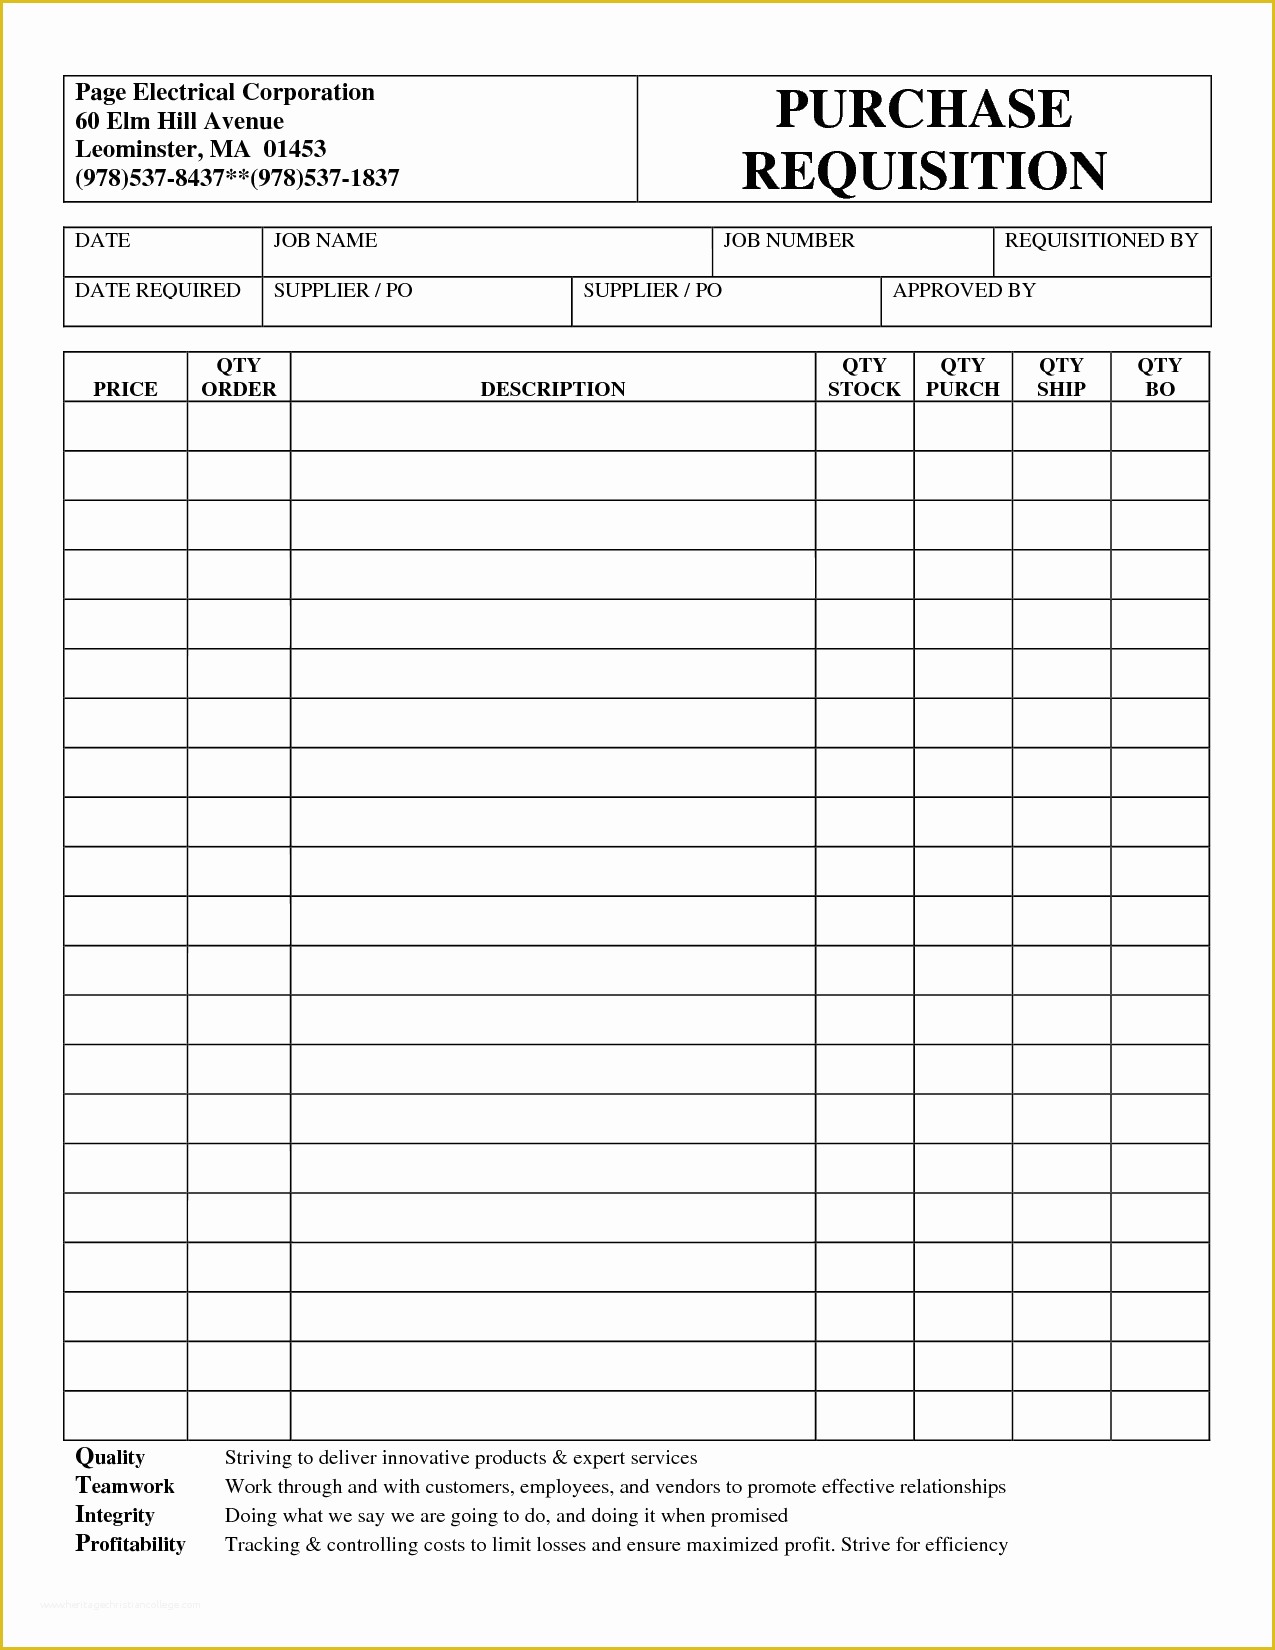 free-requisition-form-template-excel-of-stationery-requisition-form